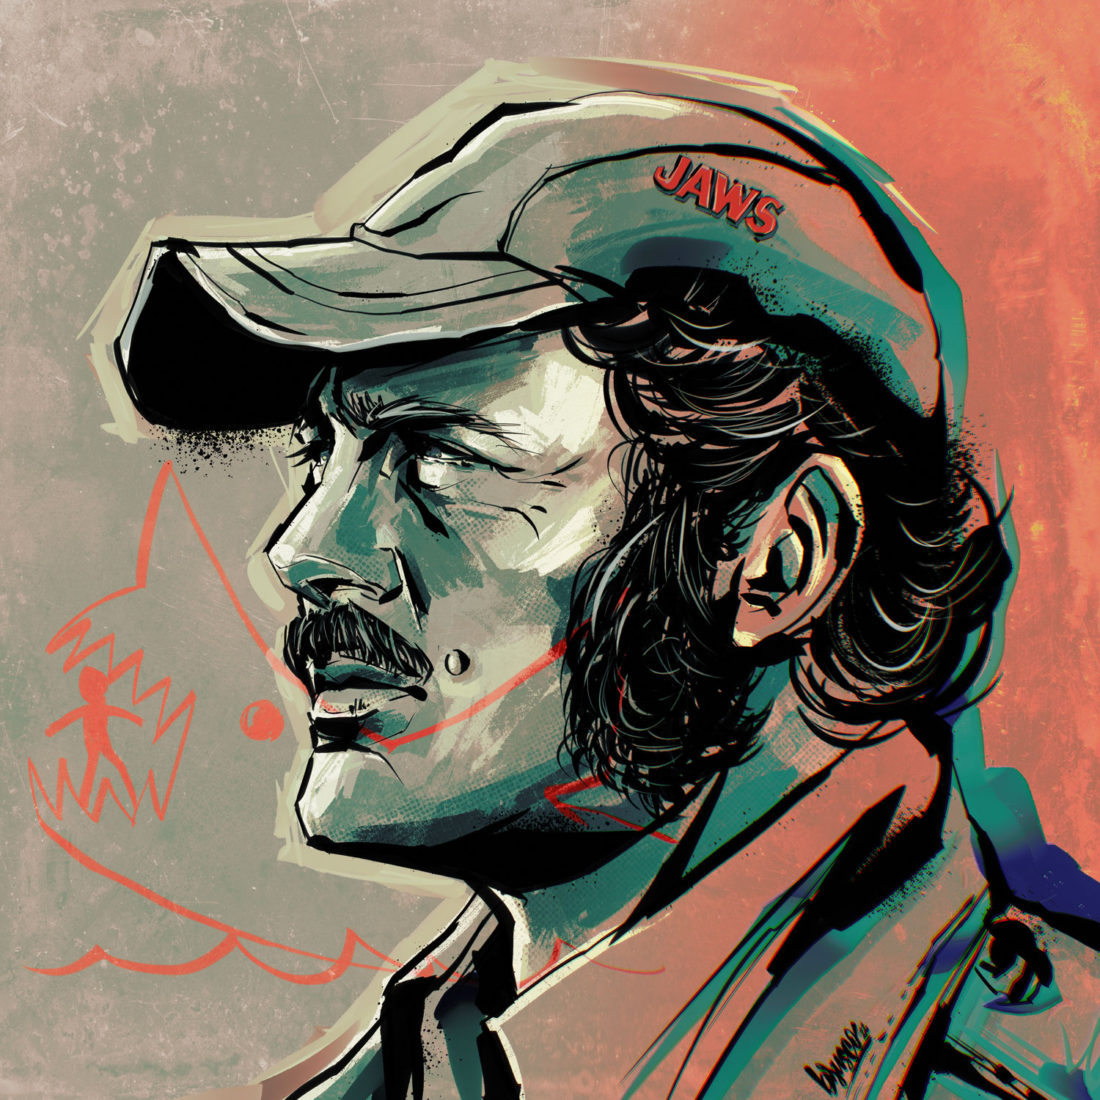 Quint JAWS byBrusco